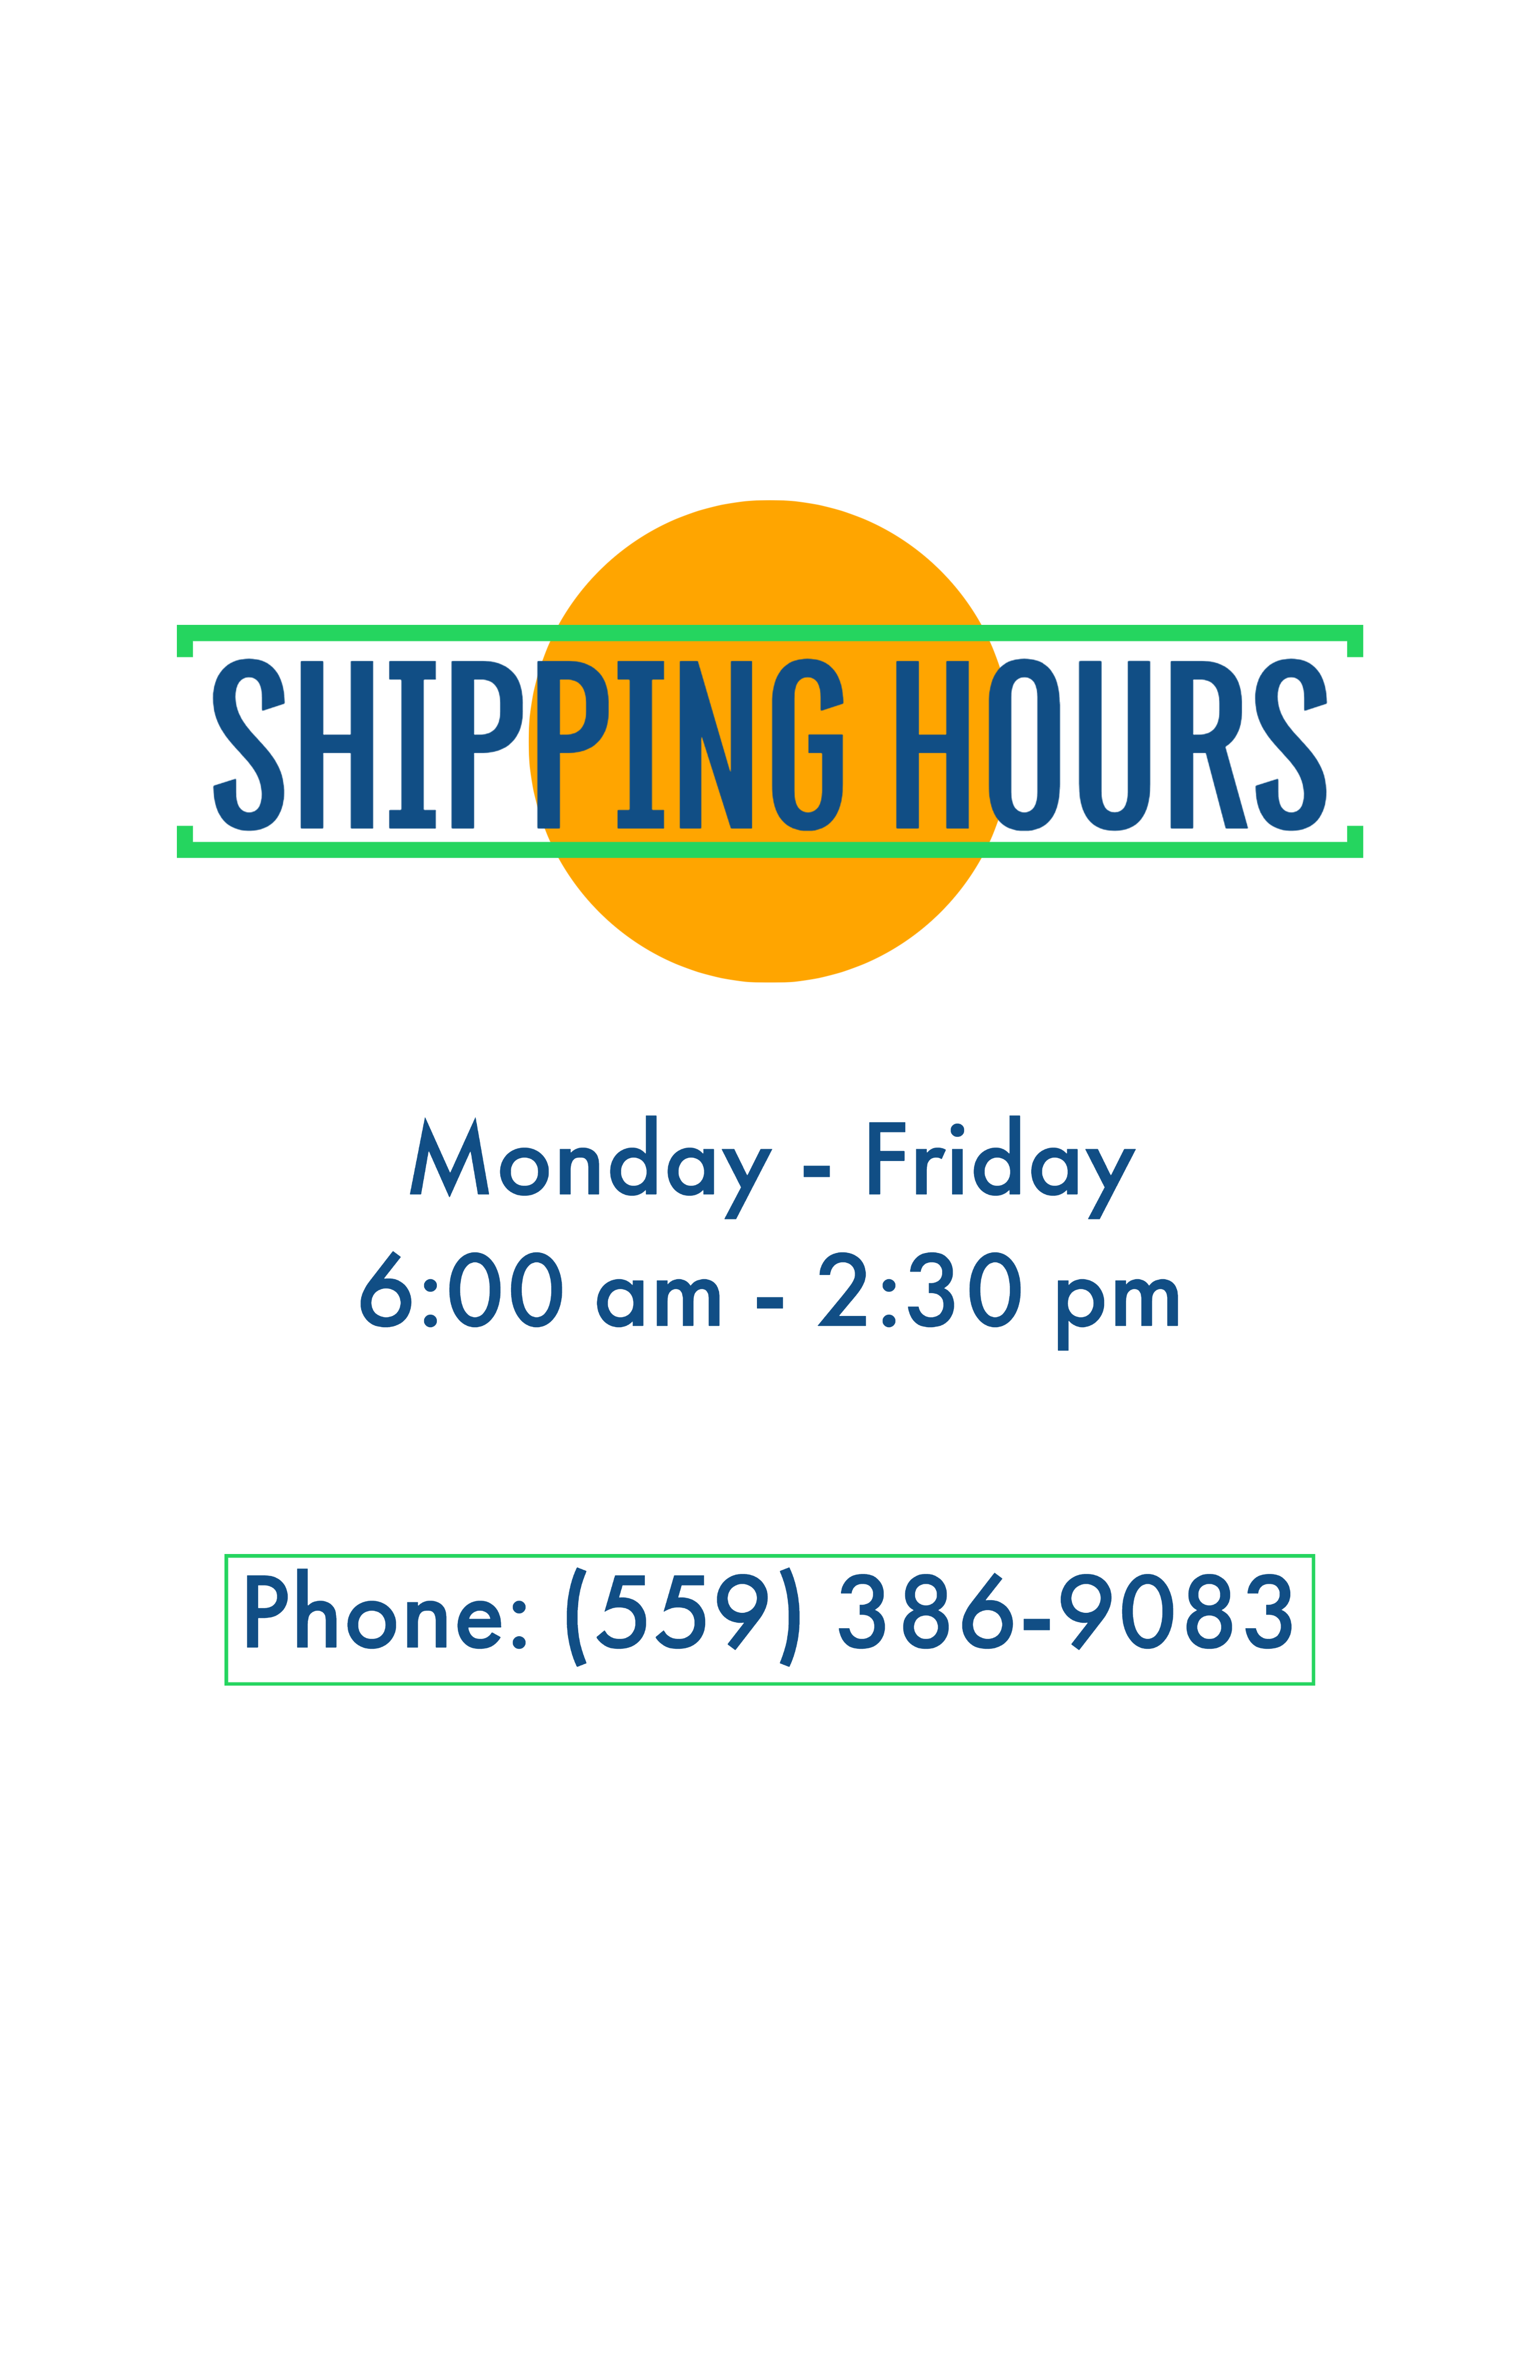 SHIPPING HOURS